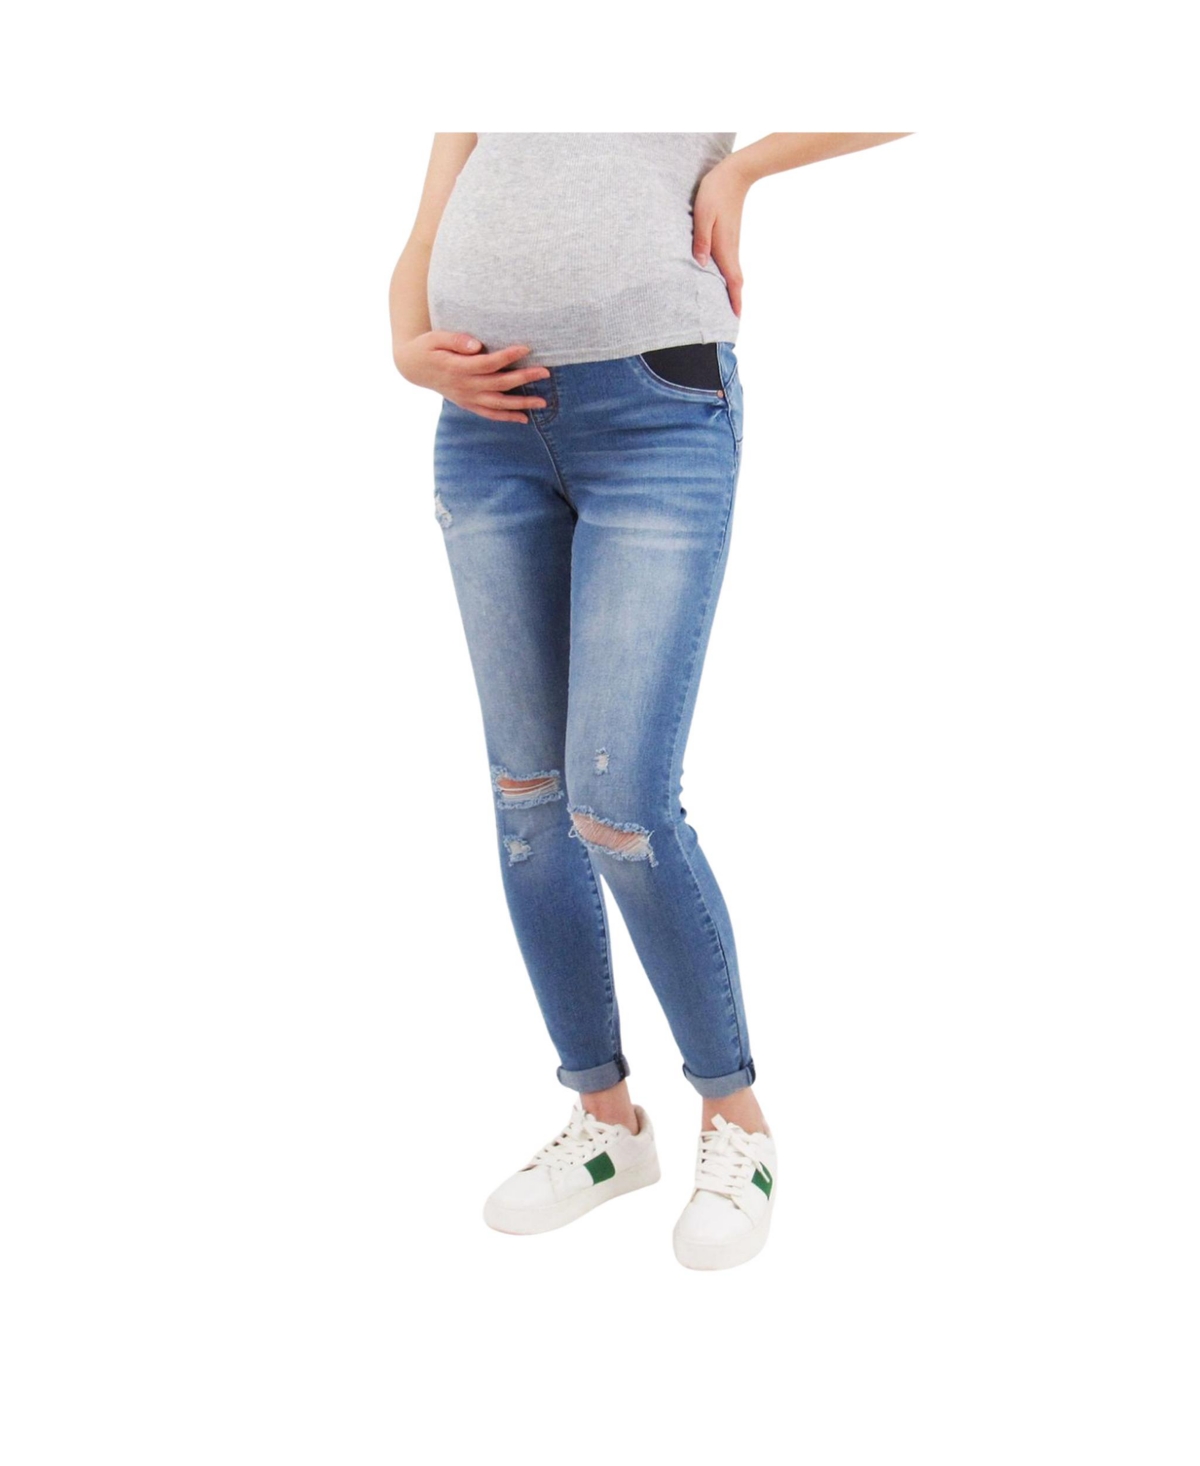 Maternity Light Wash Butt Lifter Distressed Jeans With Belly Band - Light wash